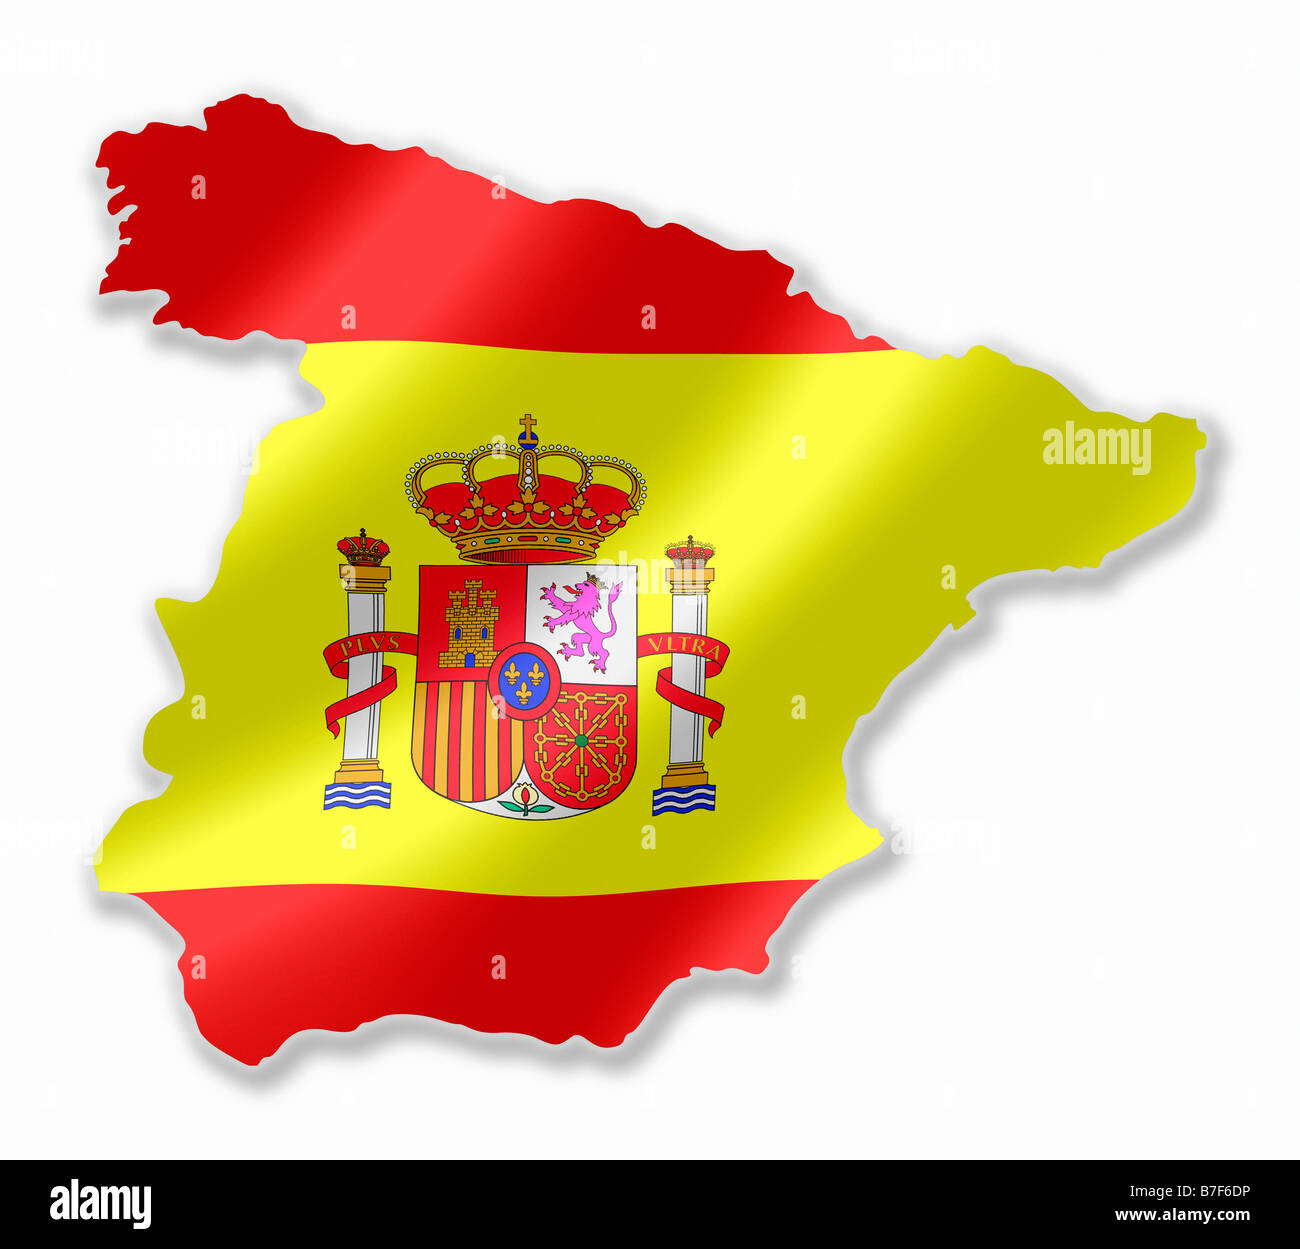 Spain Spanish Country Map Outline With National Flag Inside Stock Photo